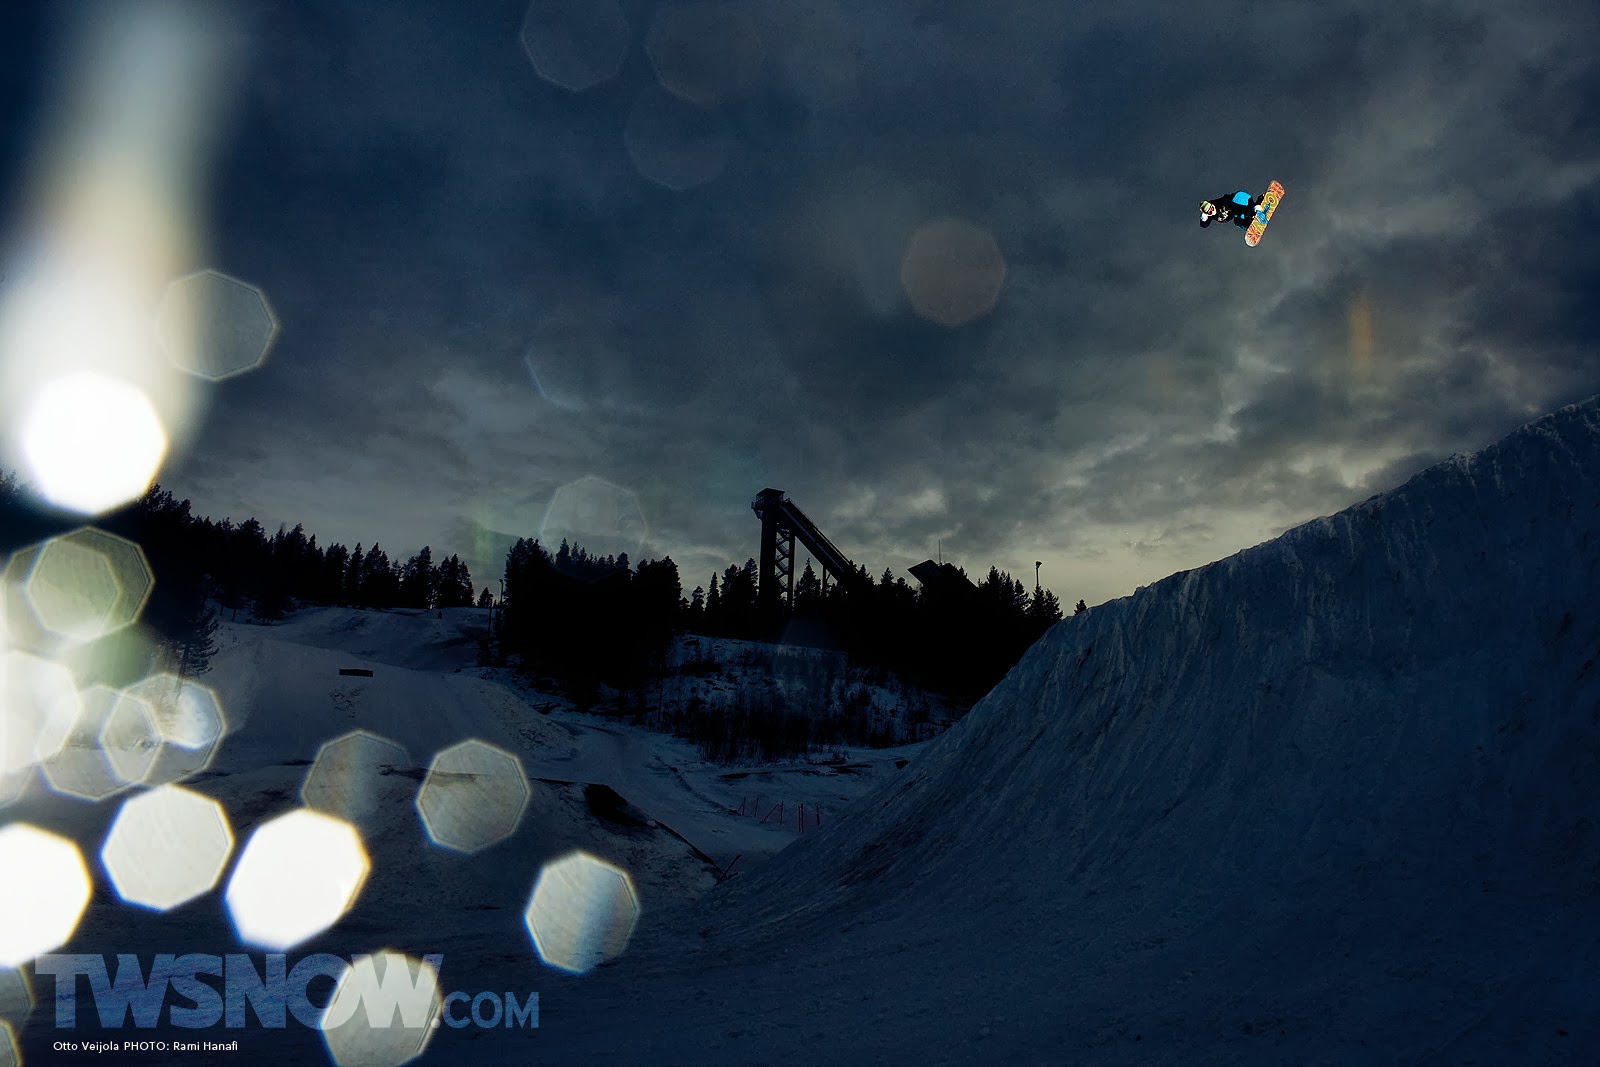 100 Best Snowboarding Wallpapers From Past 6 Years | Snowboarding Days ...